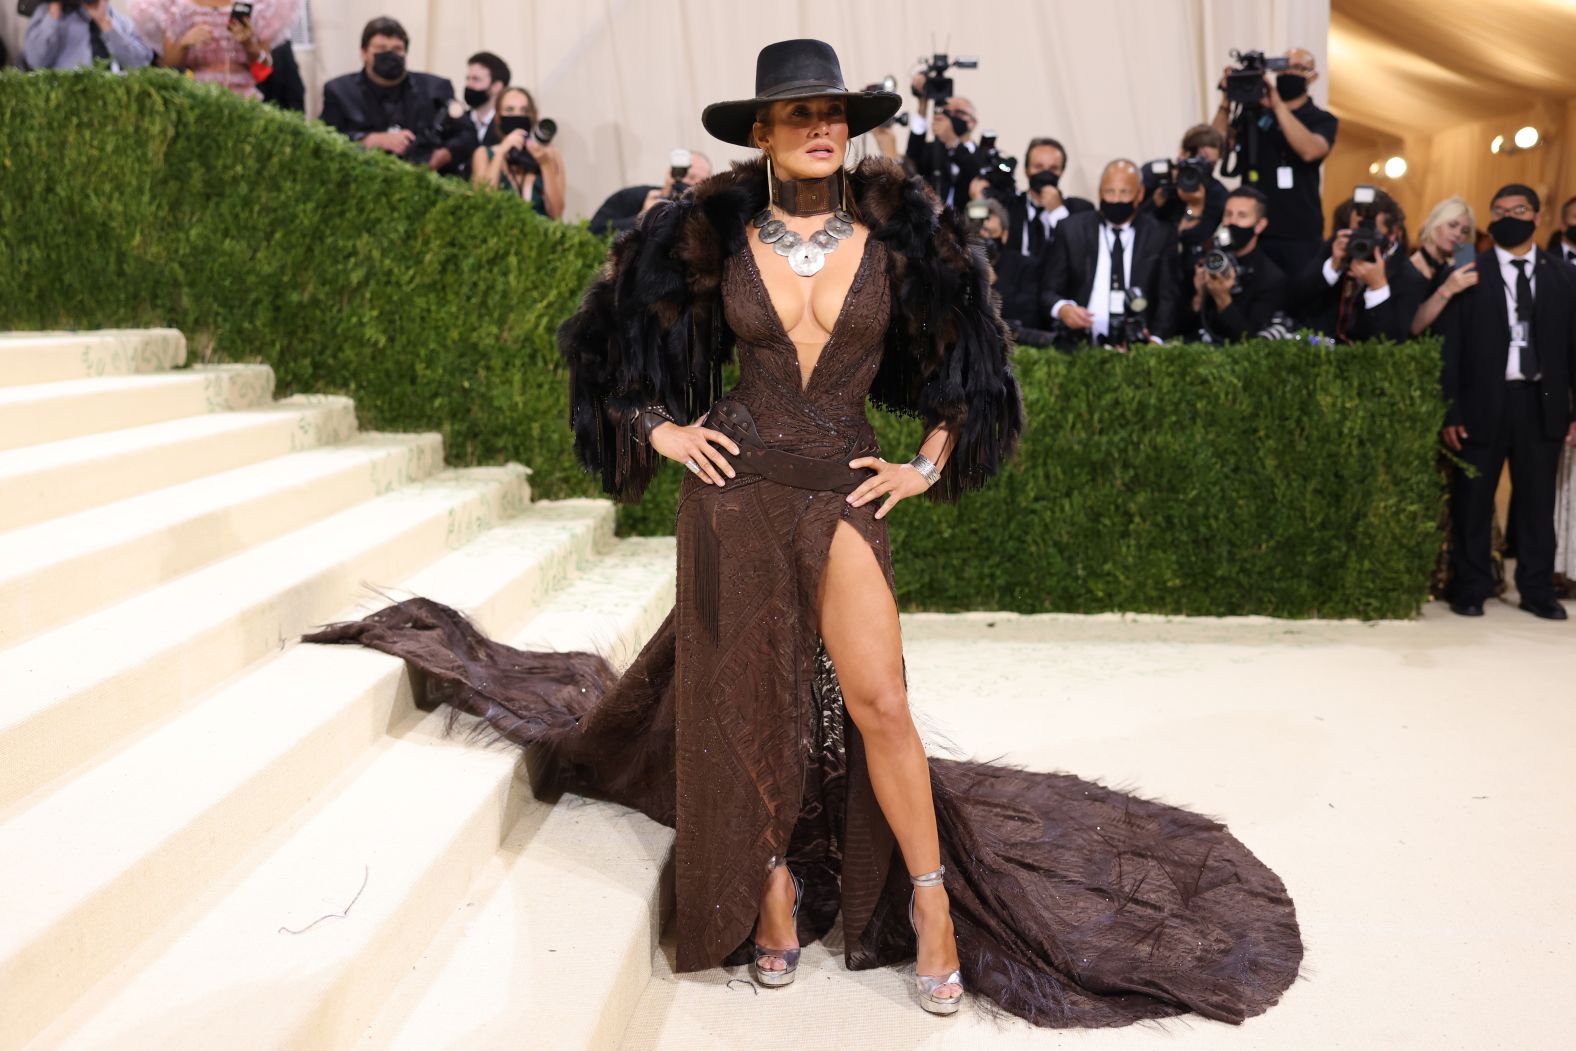 Jennifer Lopez hit the Met Museum steps wearing a custom Ralph Lauren outfit, which channeled the spirit of the Wild West. Donning a faux fur stole, she opted for a deep brown dress embellished with crystal drops, braided silk and leather trims -- topped off with a cowboy hat that completed the look.